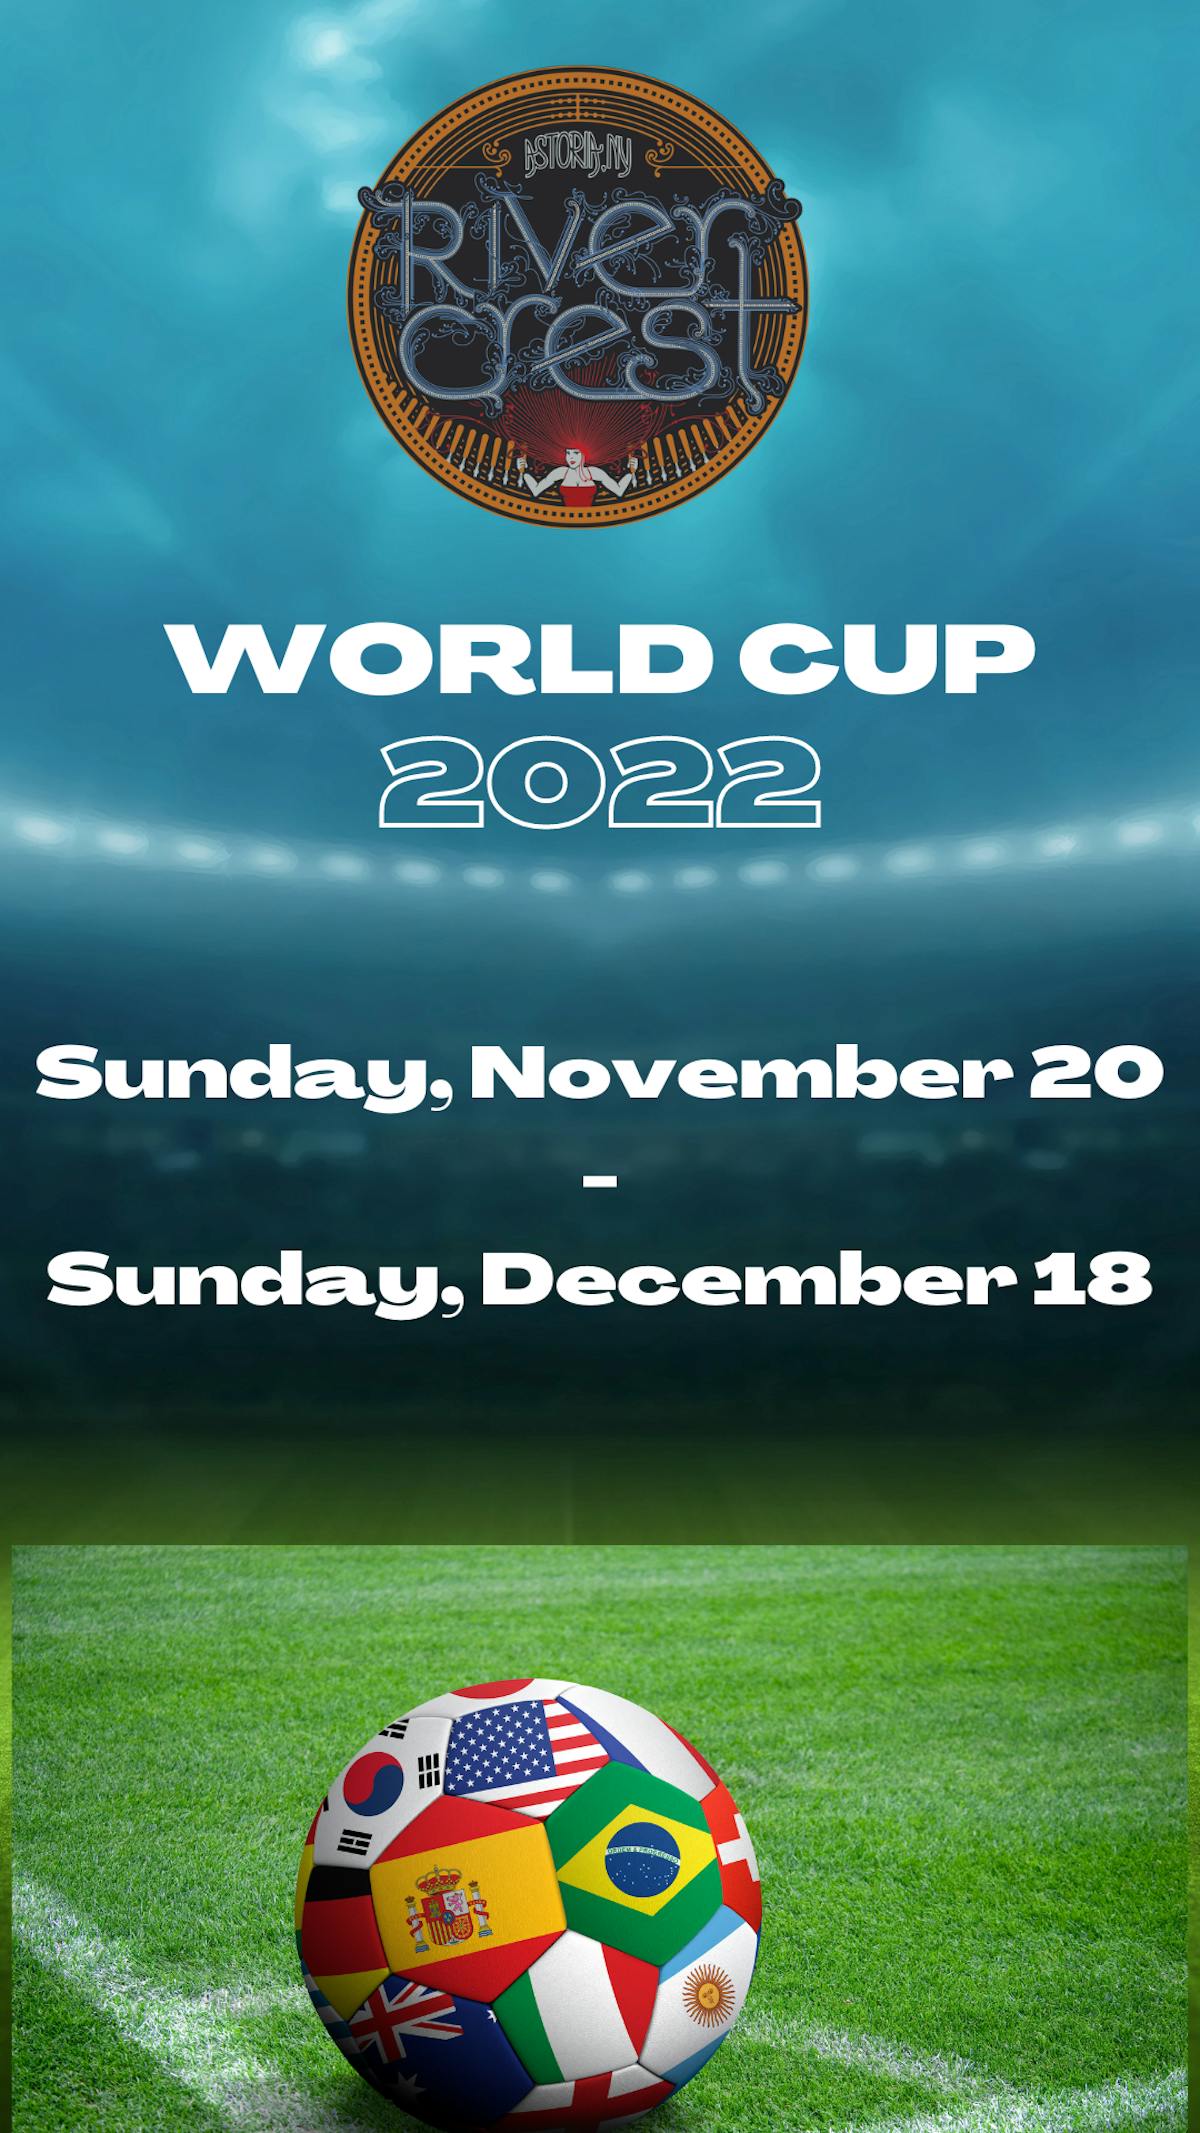 Rivercrest in Astoria will be showing the following FIFA World Cup Qatar 2022 games